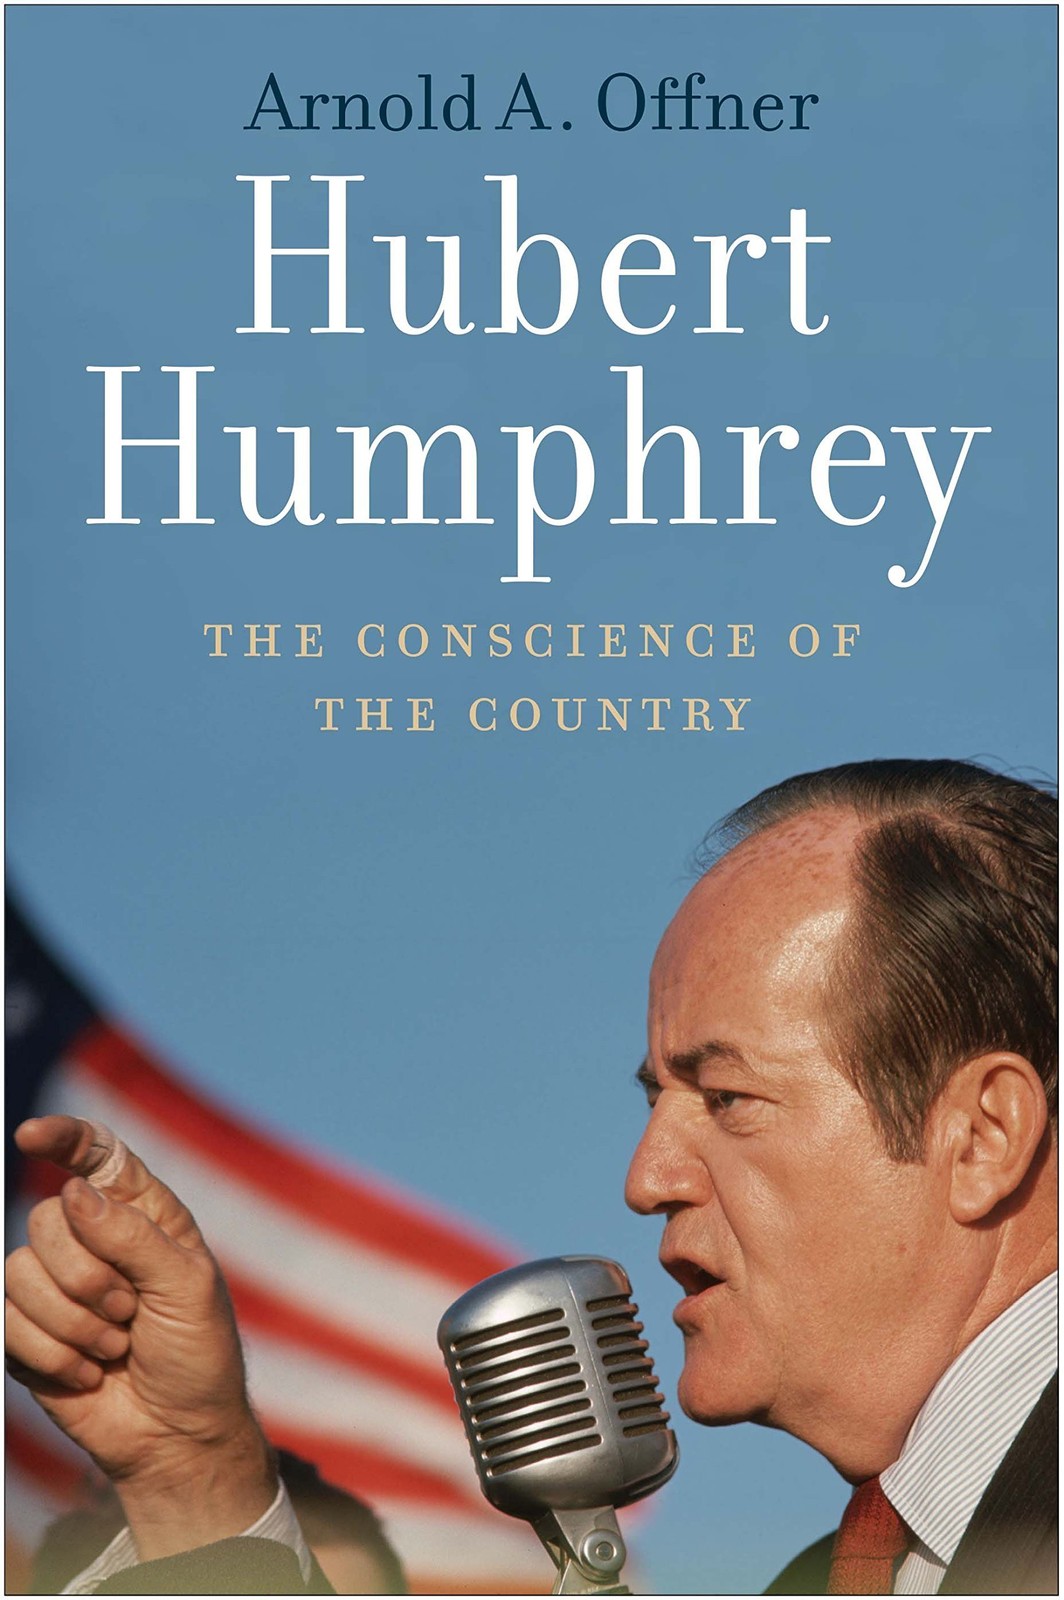 The cover of Hubert Humphrey: The Conscience of the Country